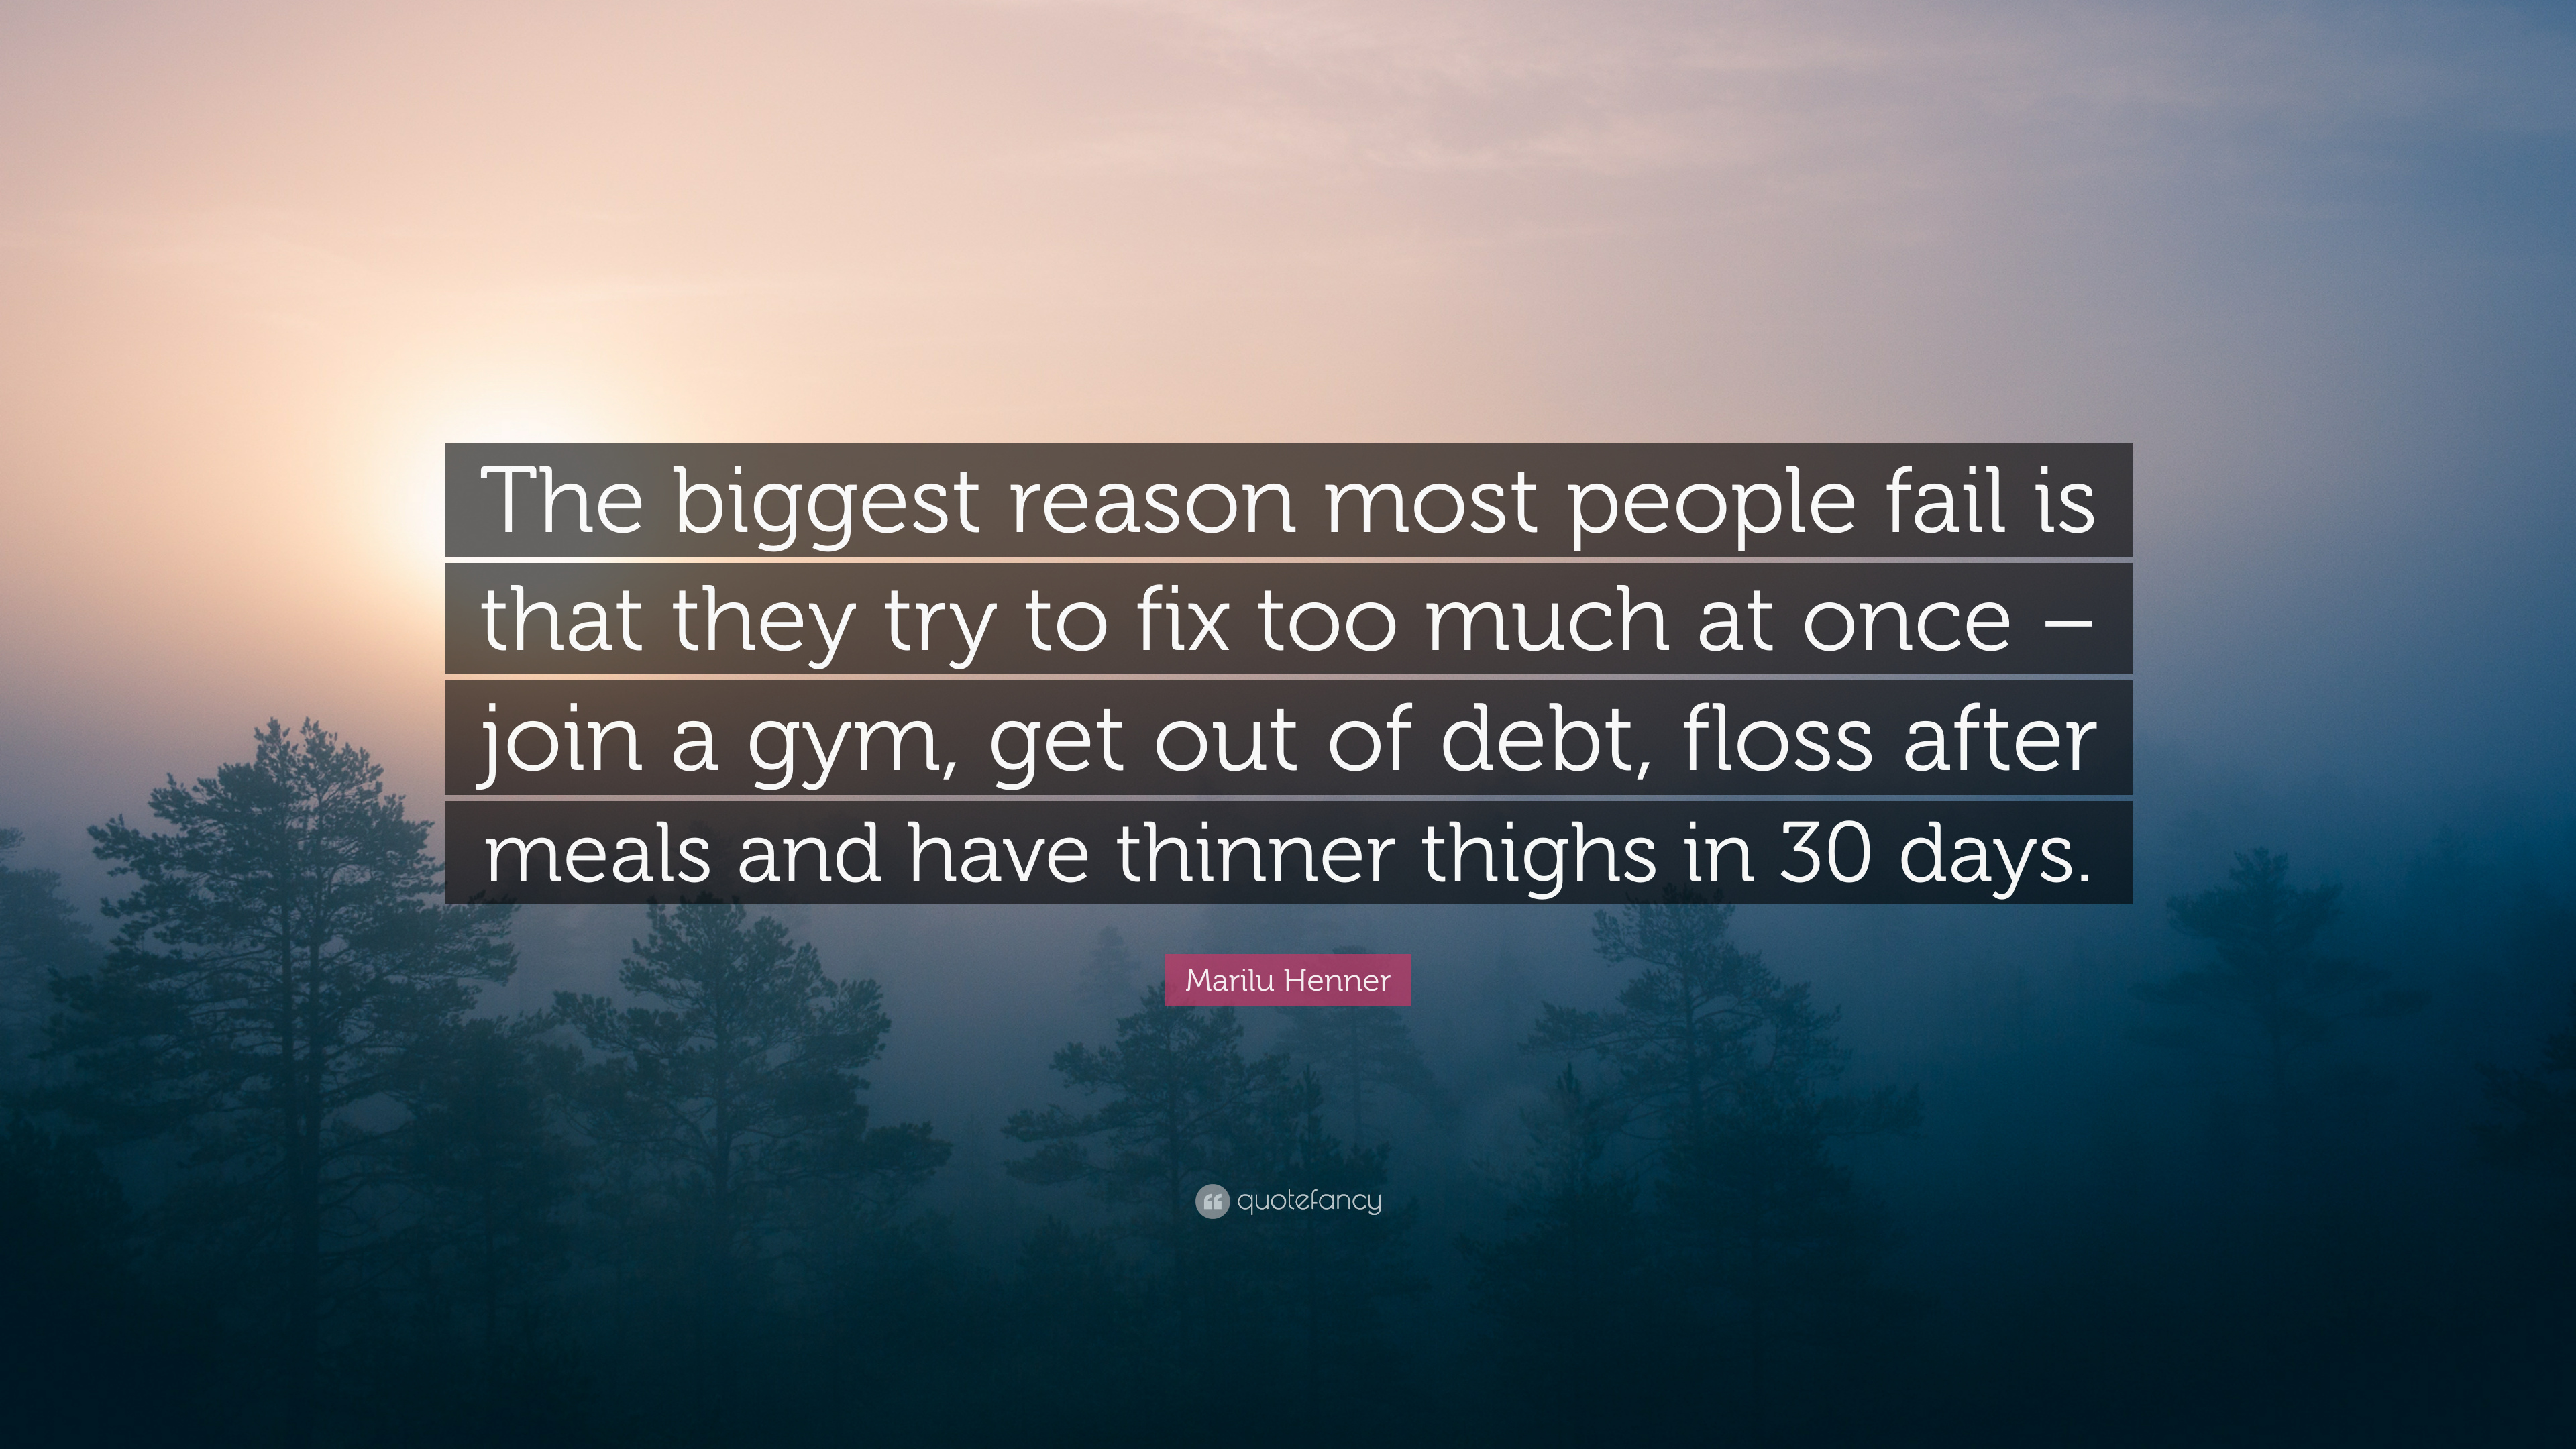 Marilu Henner Quote: “The biggest reason most people fail is that